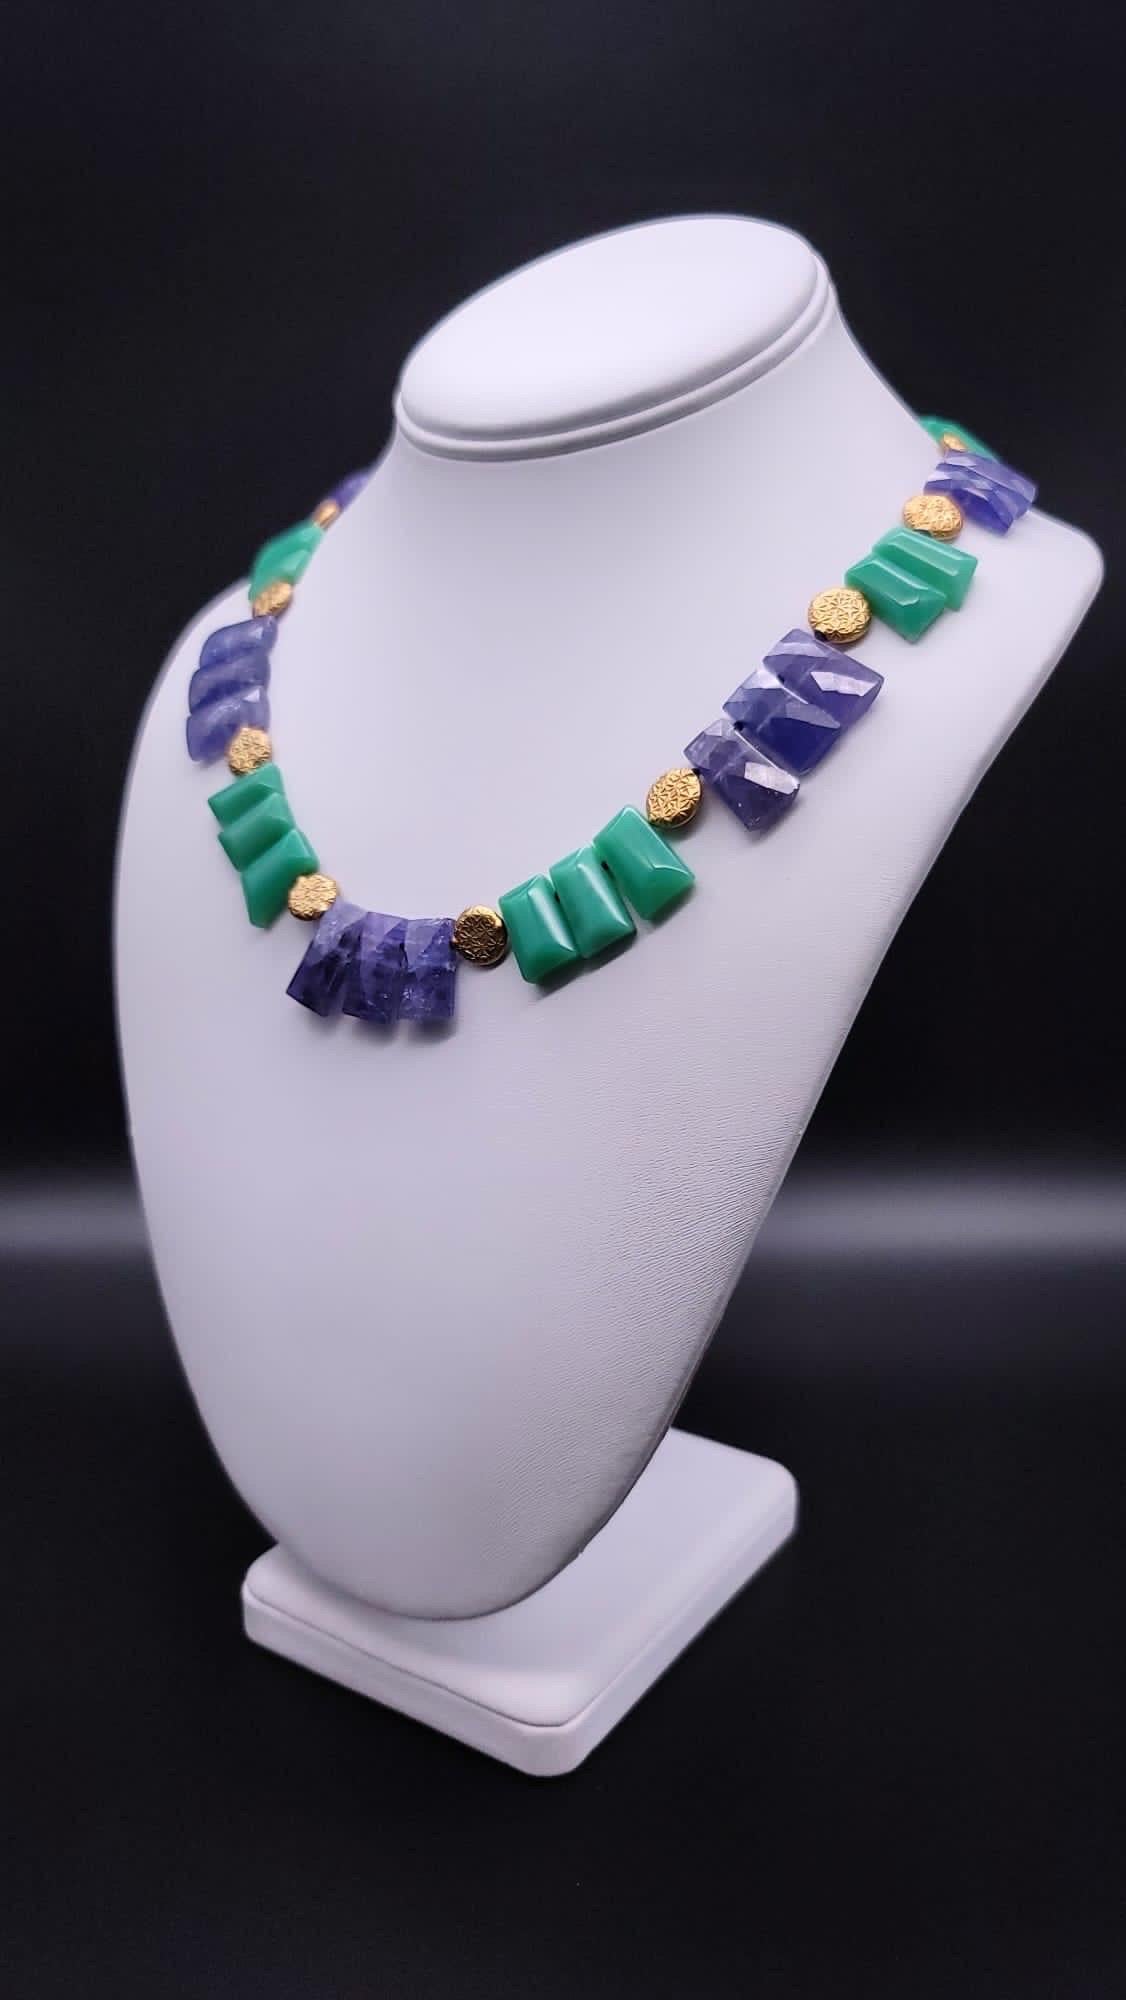 Mixed Cut A.Jeschel Tanzanite and Chrysoprase in a matched collar necklace. For Sale